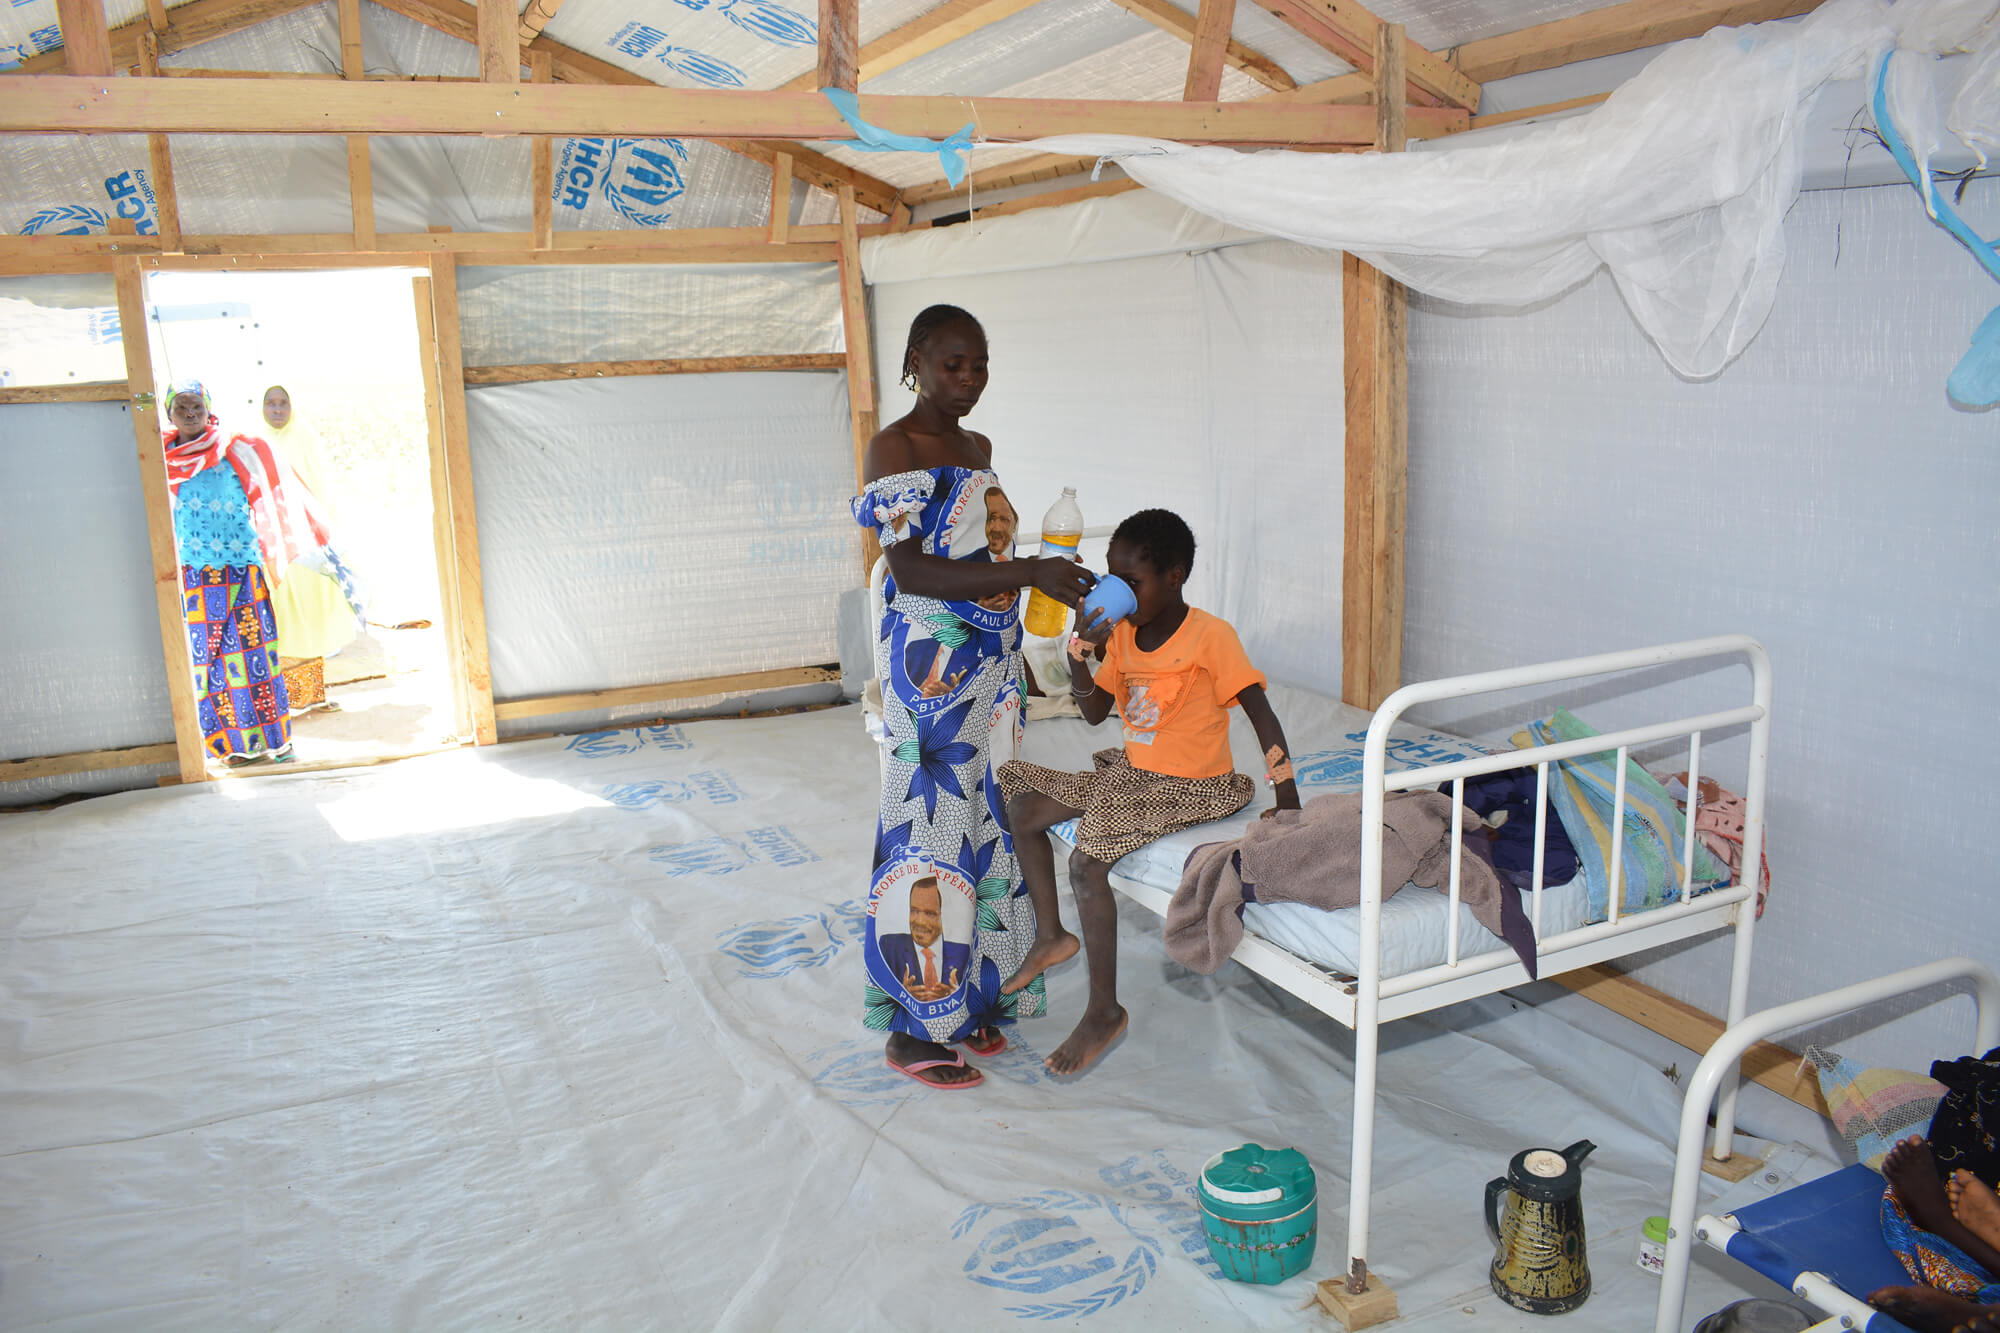 A cholera patient’s mother provides oral rehydration solution to her child in the cholera treatment center.